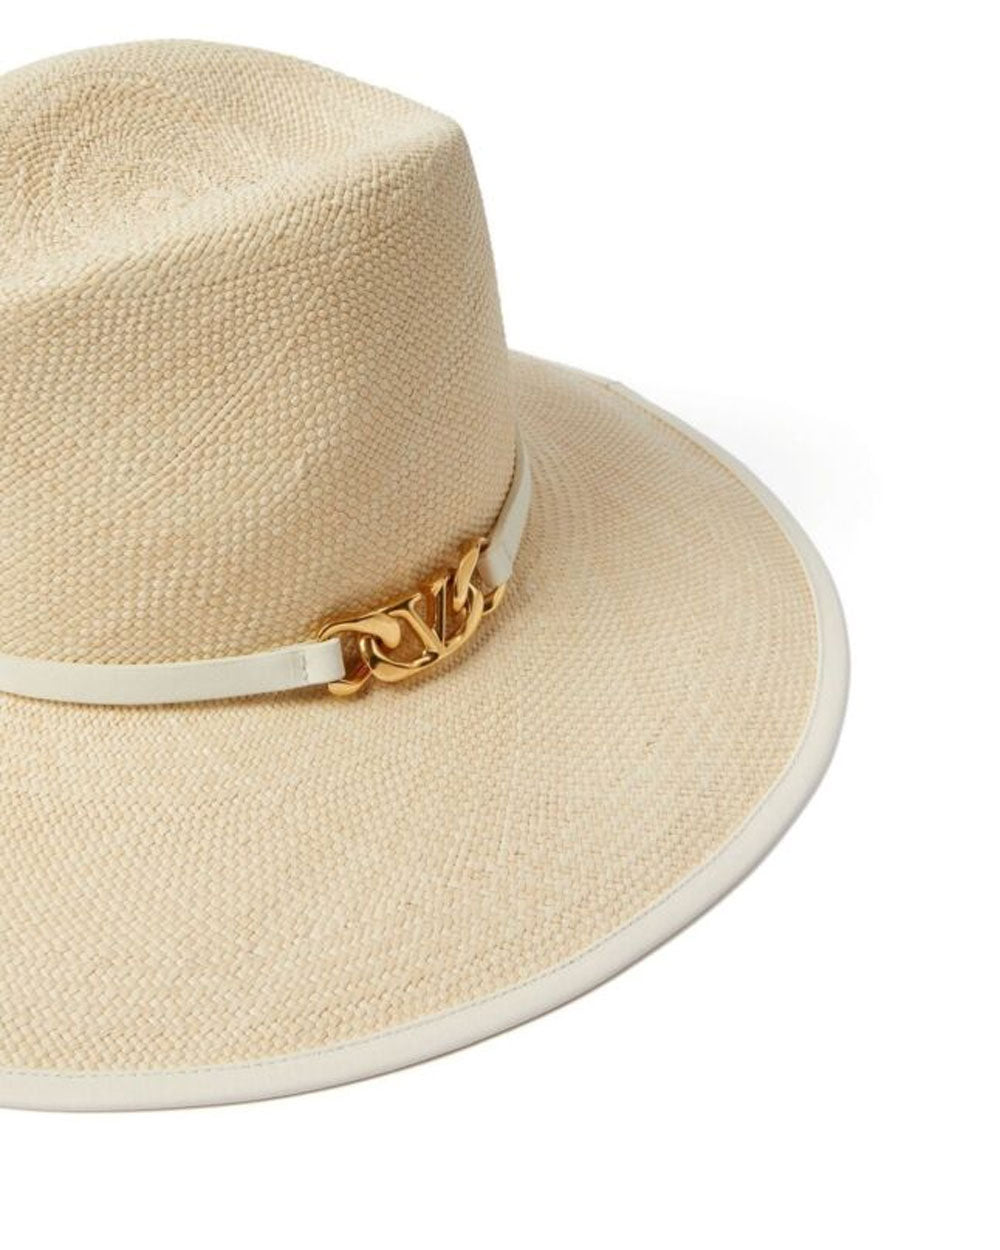 Vlogo Chain Hat in Natural